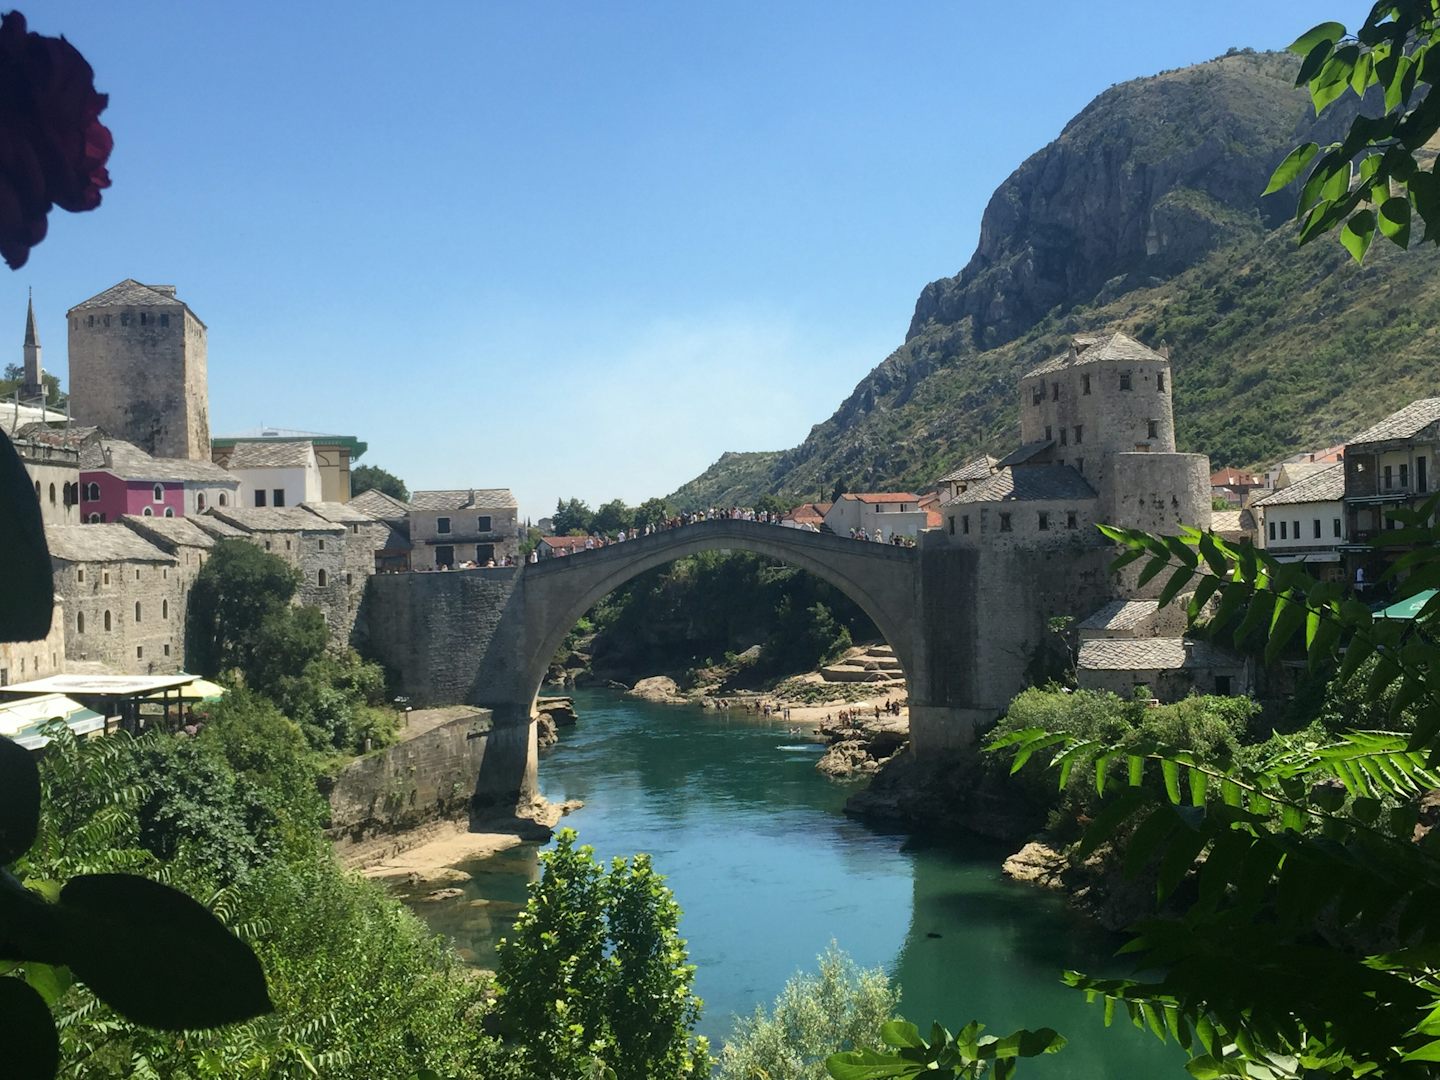 Old bridge in Mostar, Bosnia-Herzegovina seen on an all-day private tour by car with guide. Doable due to extended evening stay in port of Dubrovnik in Croatia.